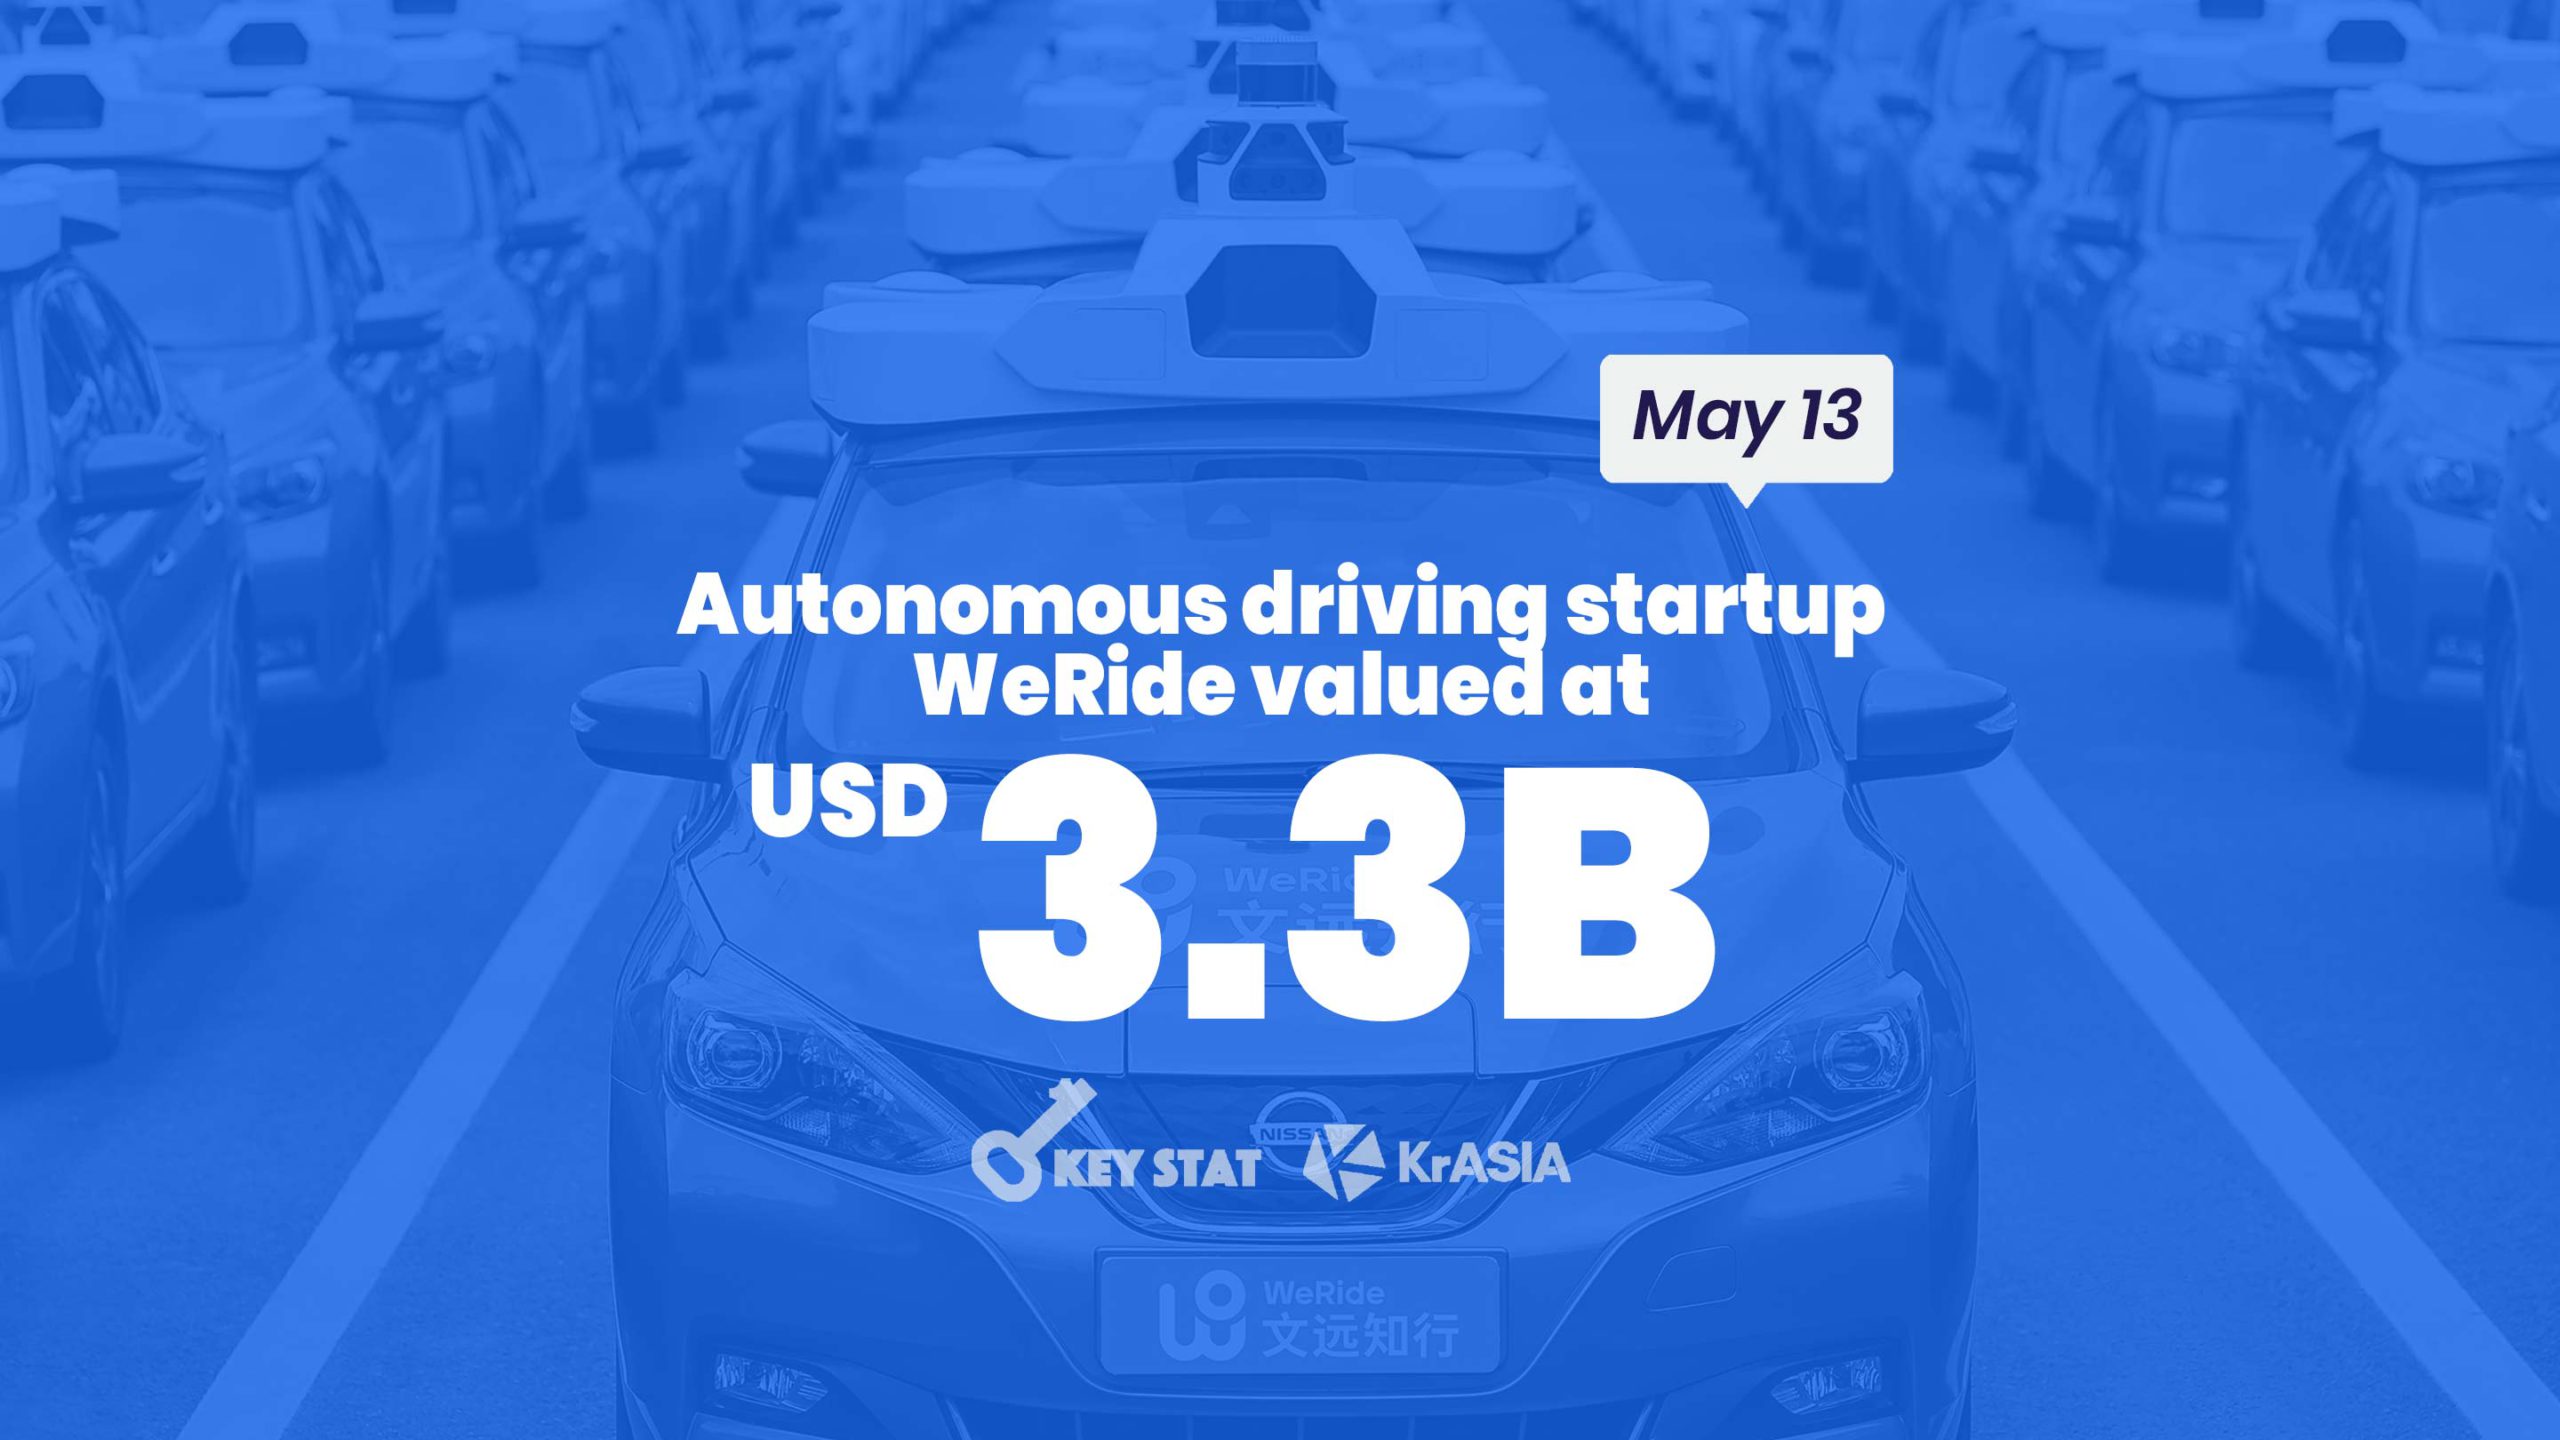 KEY STAT | Self-driving vehicle developer WeRide bags new funds to explore commercialization